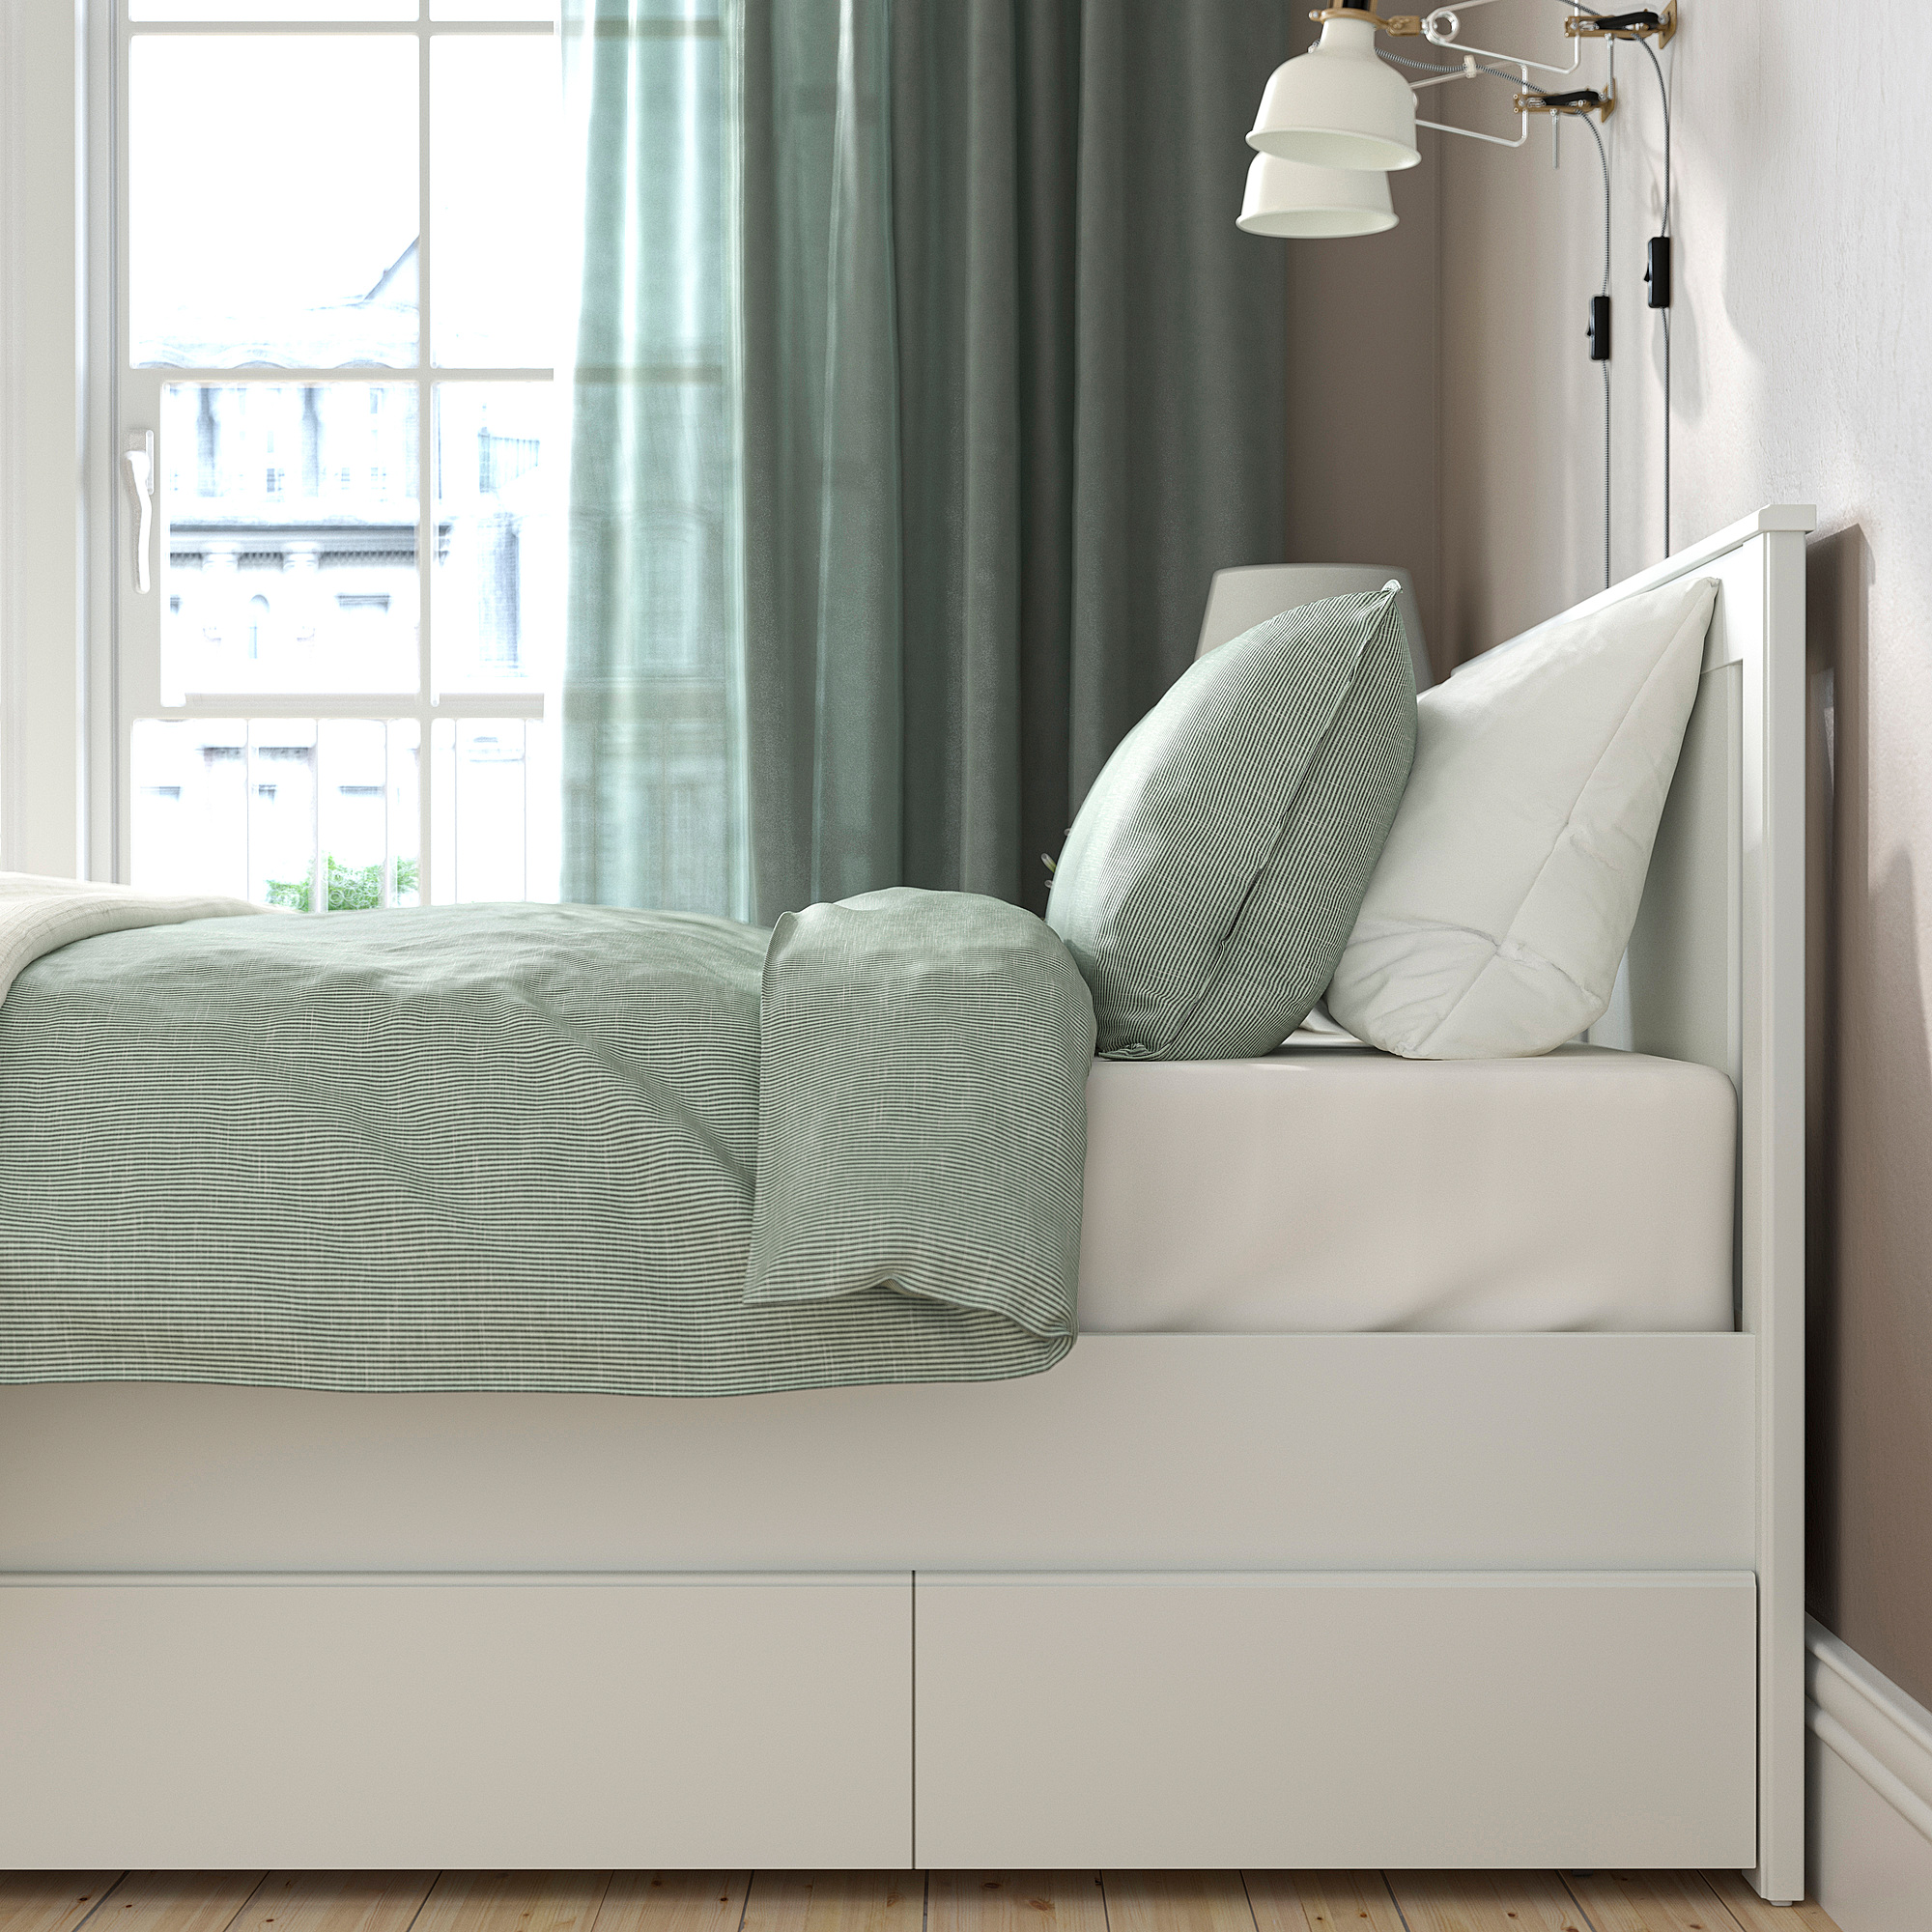 SONGESAND bed frame with 4 storage boxes